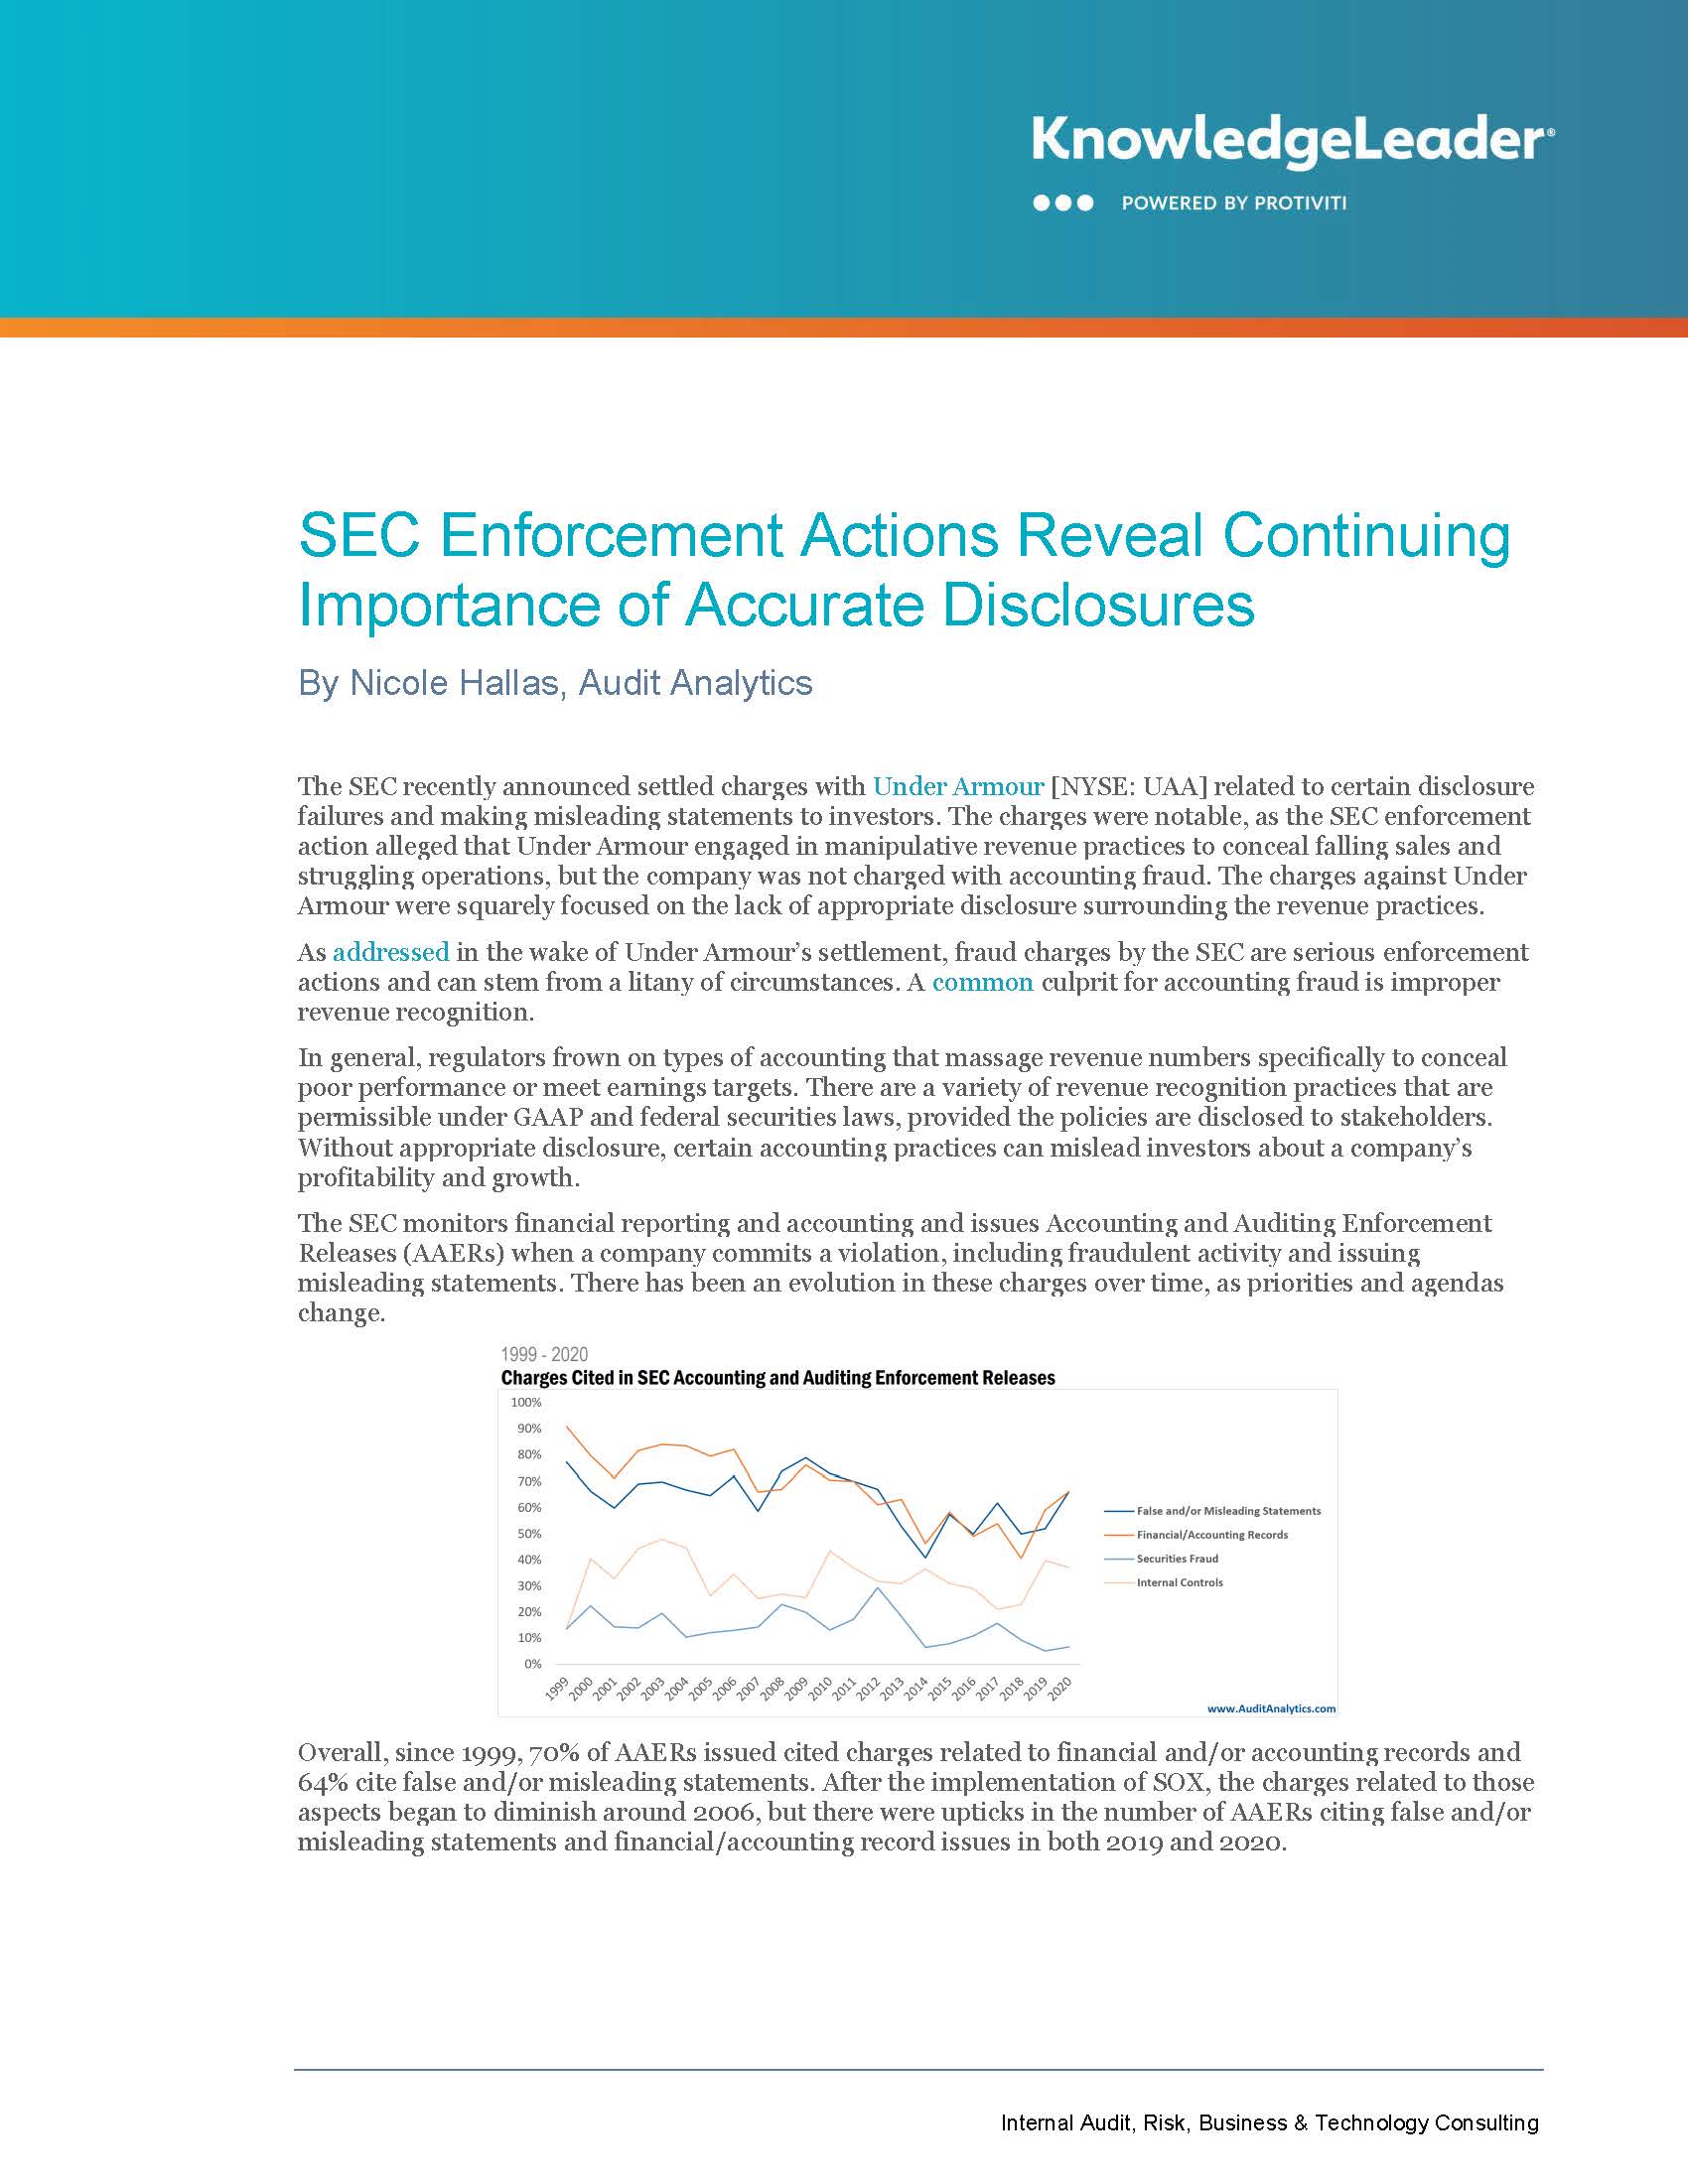 Screenshot of the first page of SEC Enforcement Actions Reveal Continuing Importance of Accurate Disclosures